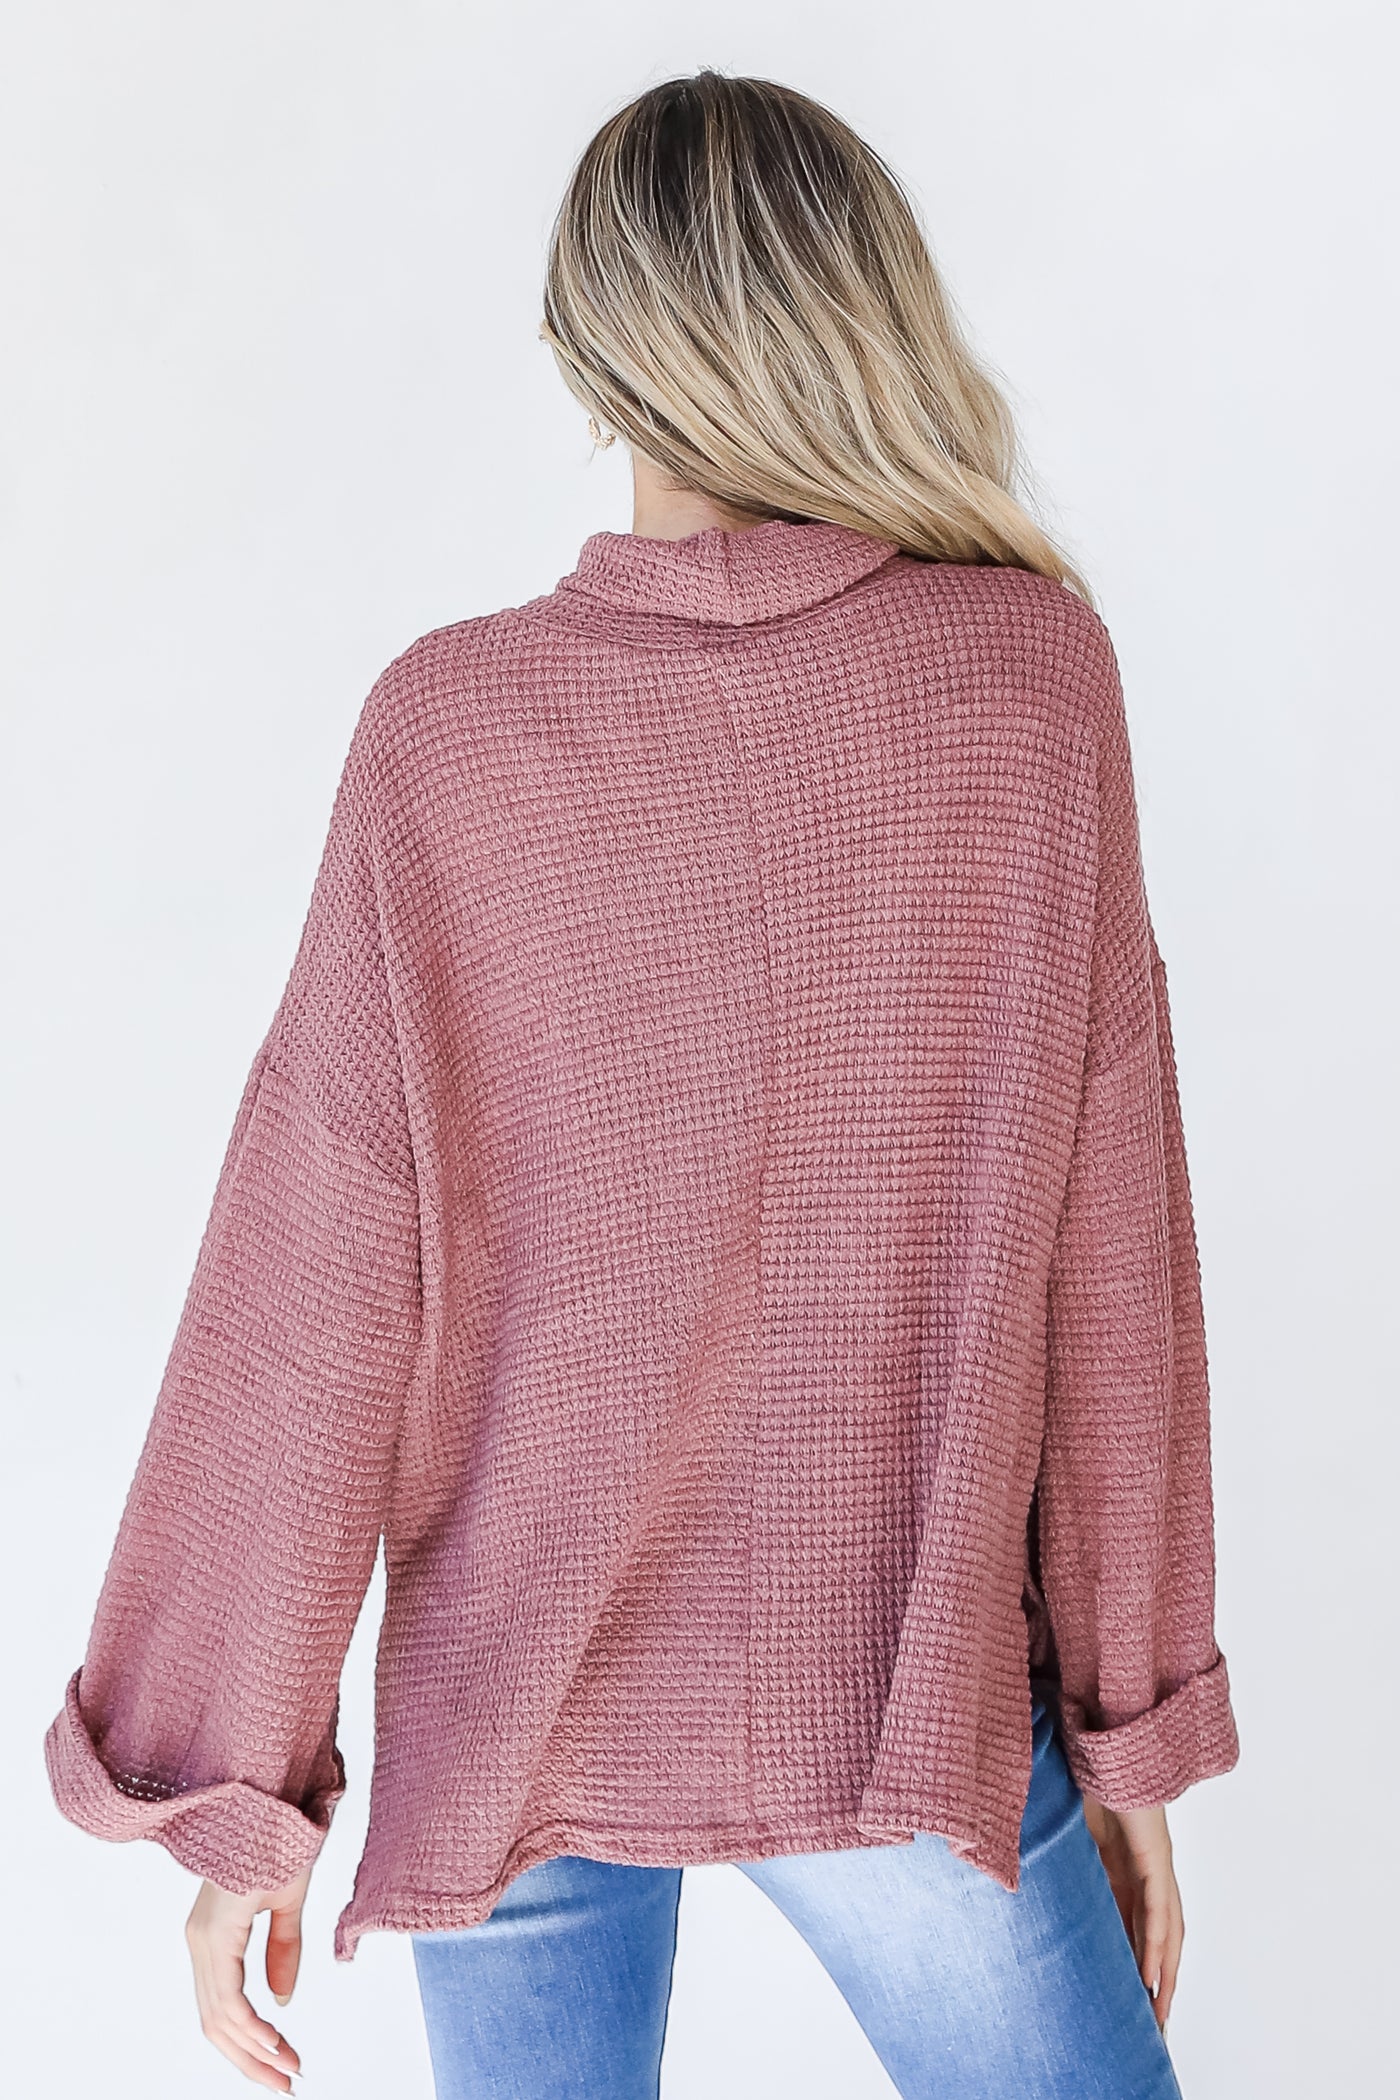 Waffle Knit Top in marsala back view